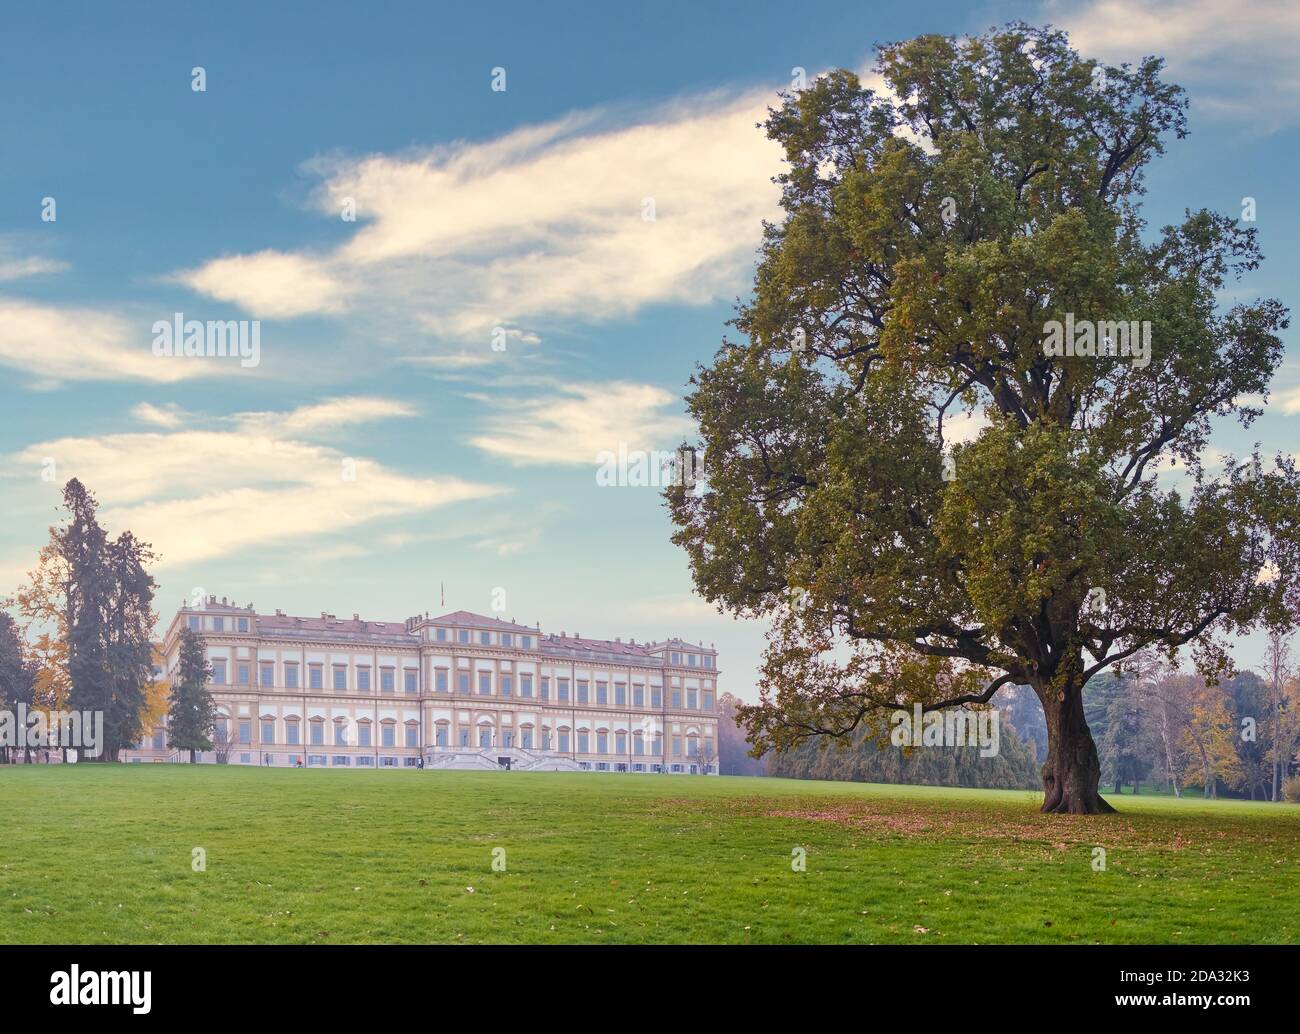 The historic Villa Reale of Monza, Italy surrounded by magnificent tree during a wonderful fall day Stock Photo